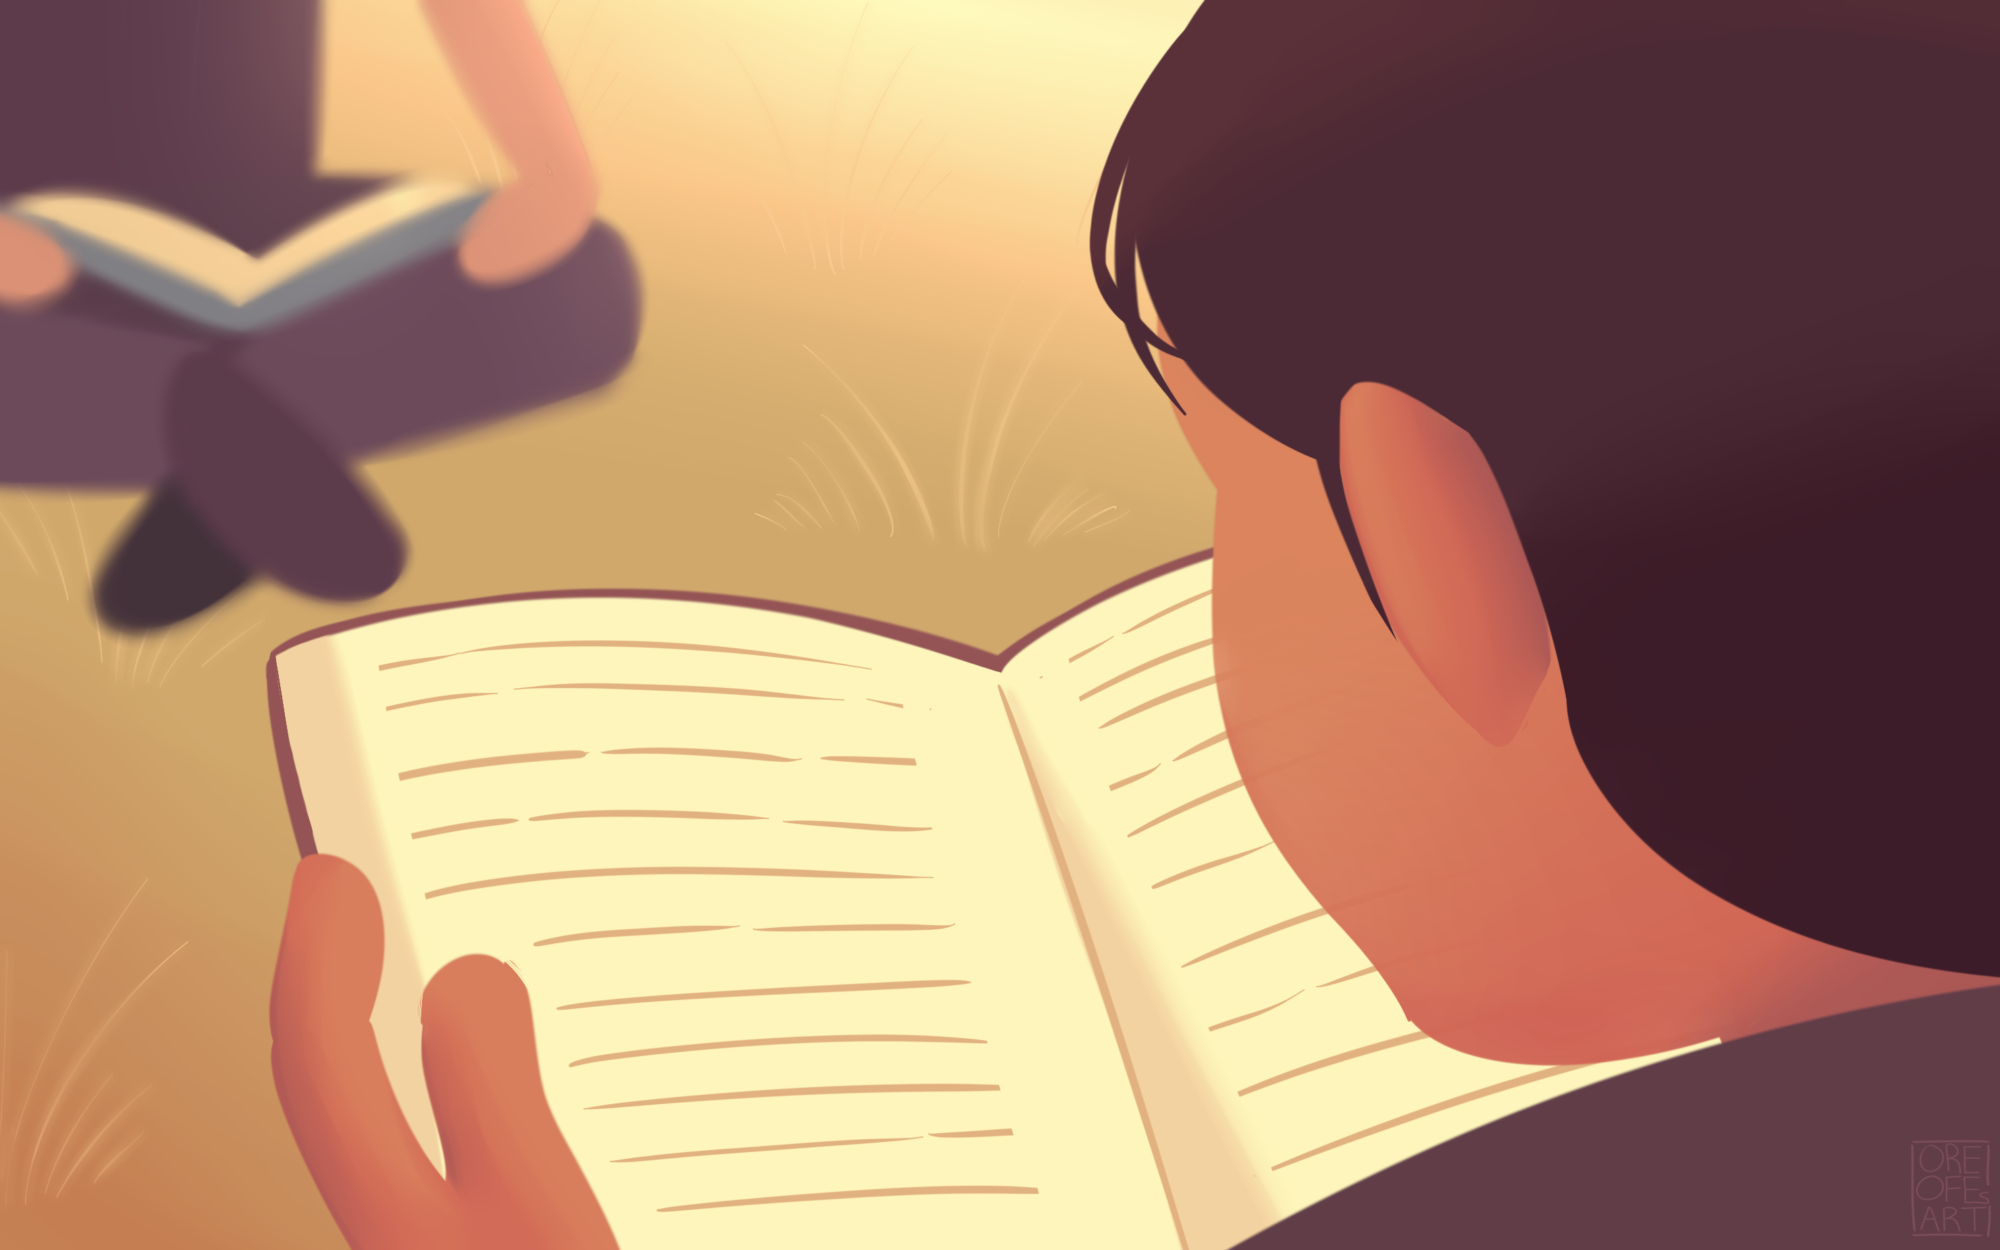 In this cartoon-like drawing, we peer over the shoulder of a child who is sitting reading a book